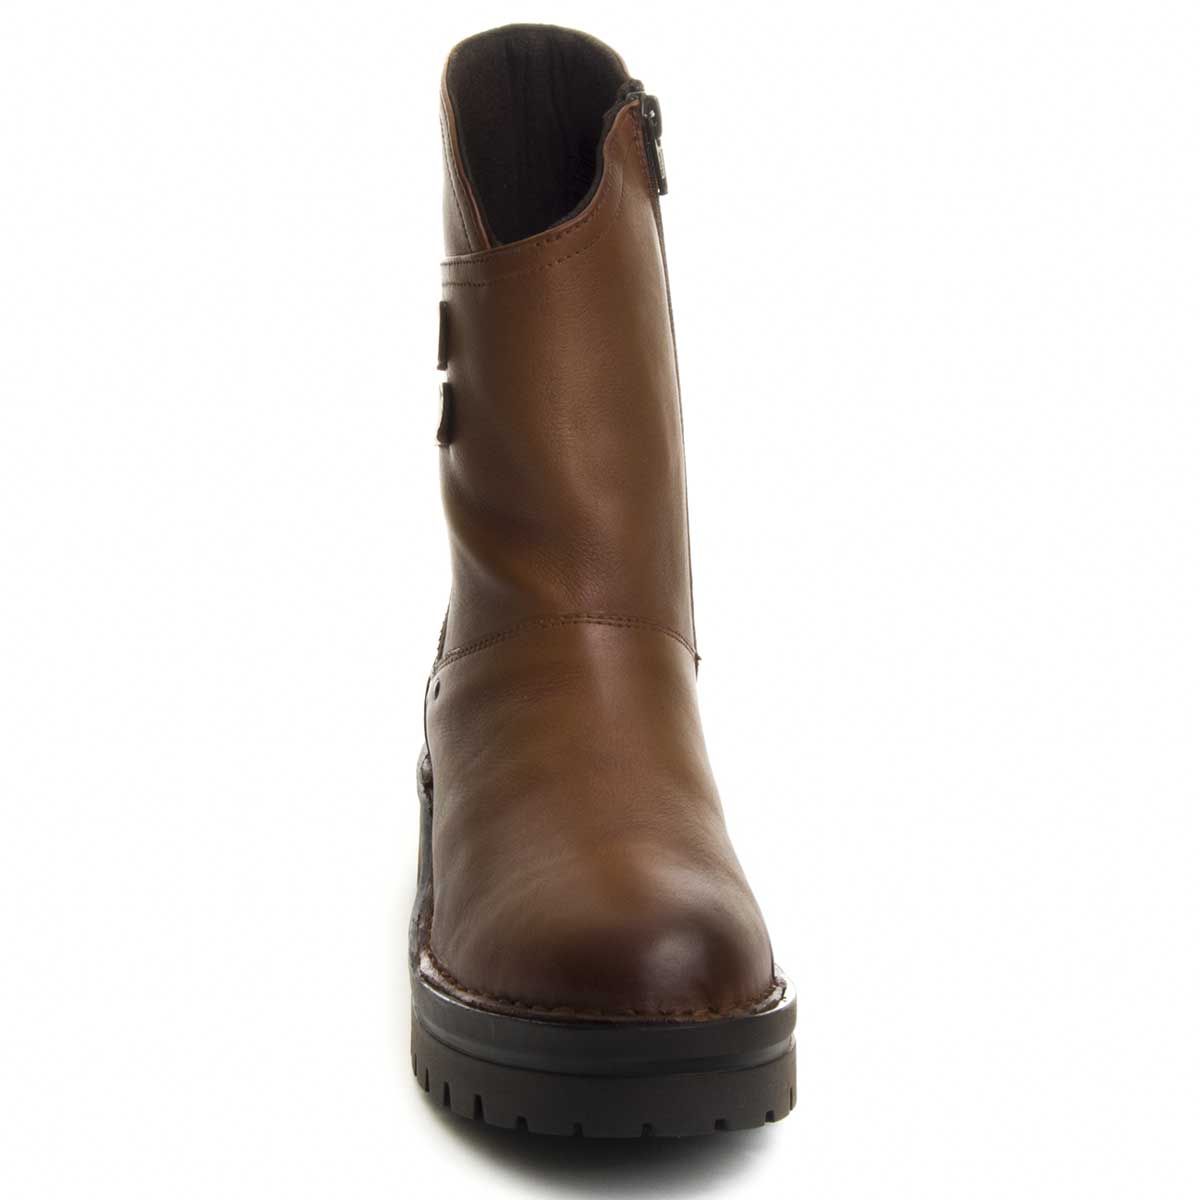 Look at the style of this boot cane, in the rear area is higher than in the front. This gives an original touch. Boot Boot with platform floor. Interior zipper. Comfortable by its padded interior. Indispensable in your closet for this winter, because it is a trend. 100% natural skin. 10 years of warranty. Purapiel Guarantee. Soft skin easy to clean. Previous and later buttress. To avoid problems in the health of our feet, it is essential that we keep in mind that winter footwear must have a thicker sole than summer. The sole will isolate our feet from the ground and prevent the cold from reaching our feet. We must also take into account, especially in the areas where the rain appears more easily, that the sole is non-slip to avoid slips. In addition, having an interior protected against the cold, which will help us keep our feet warm. All these important features are indispensable in our winter collection. Capsulous collection by Wikers